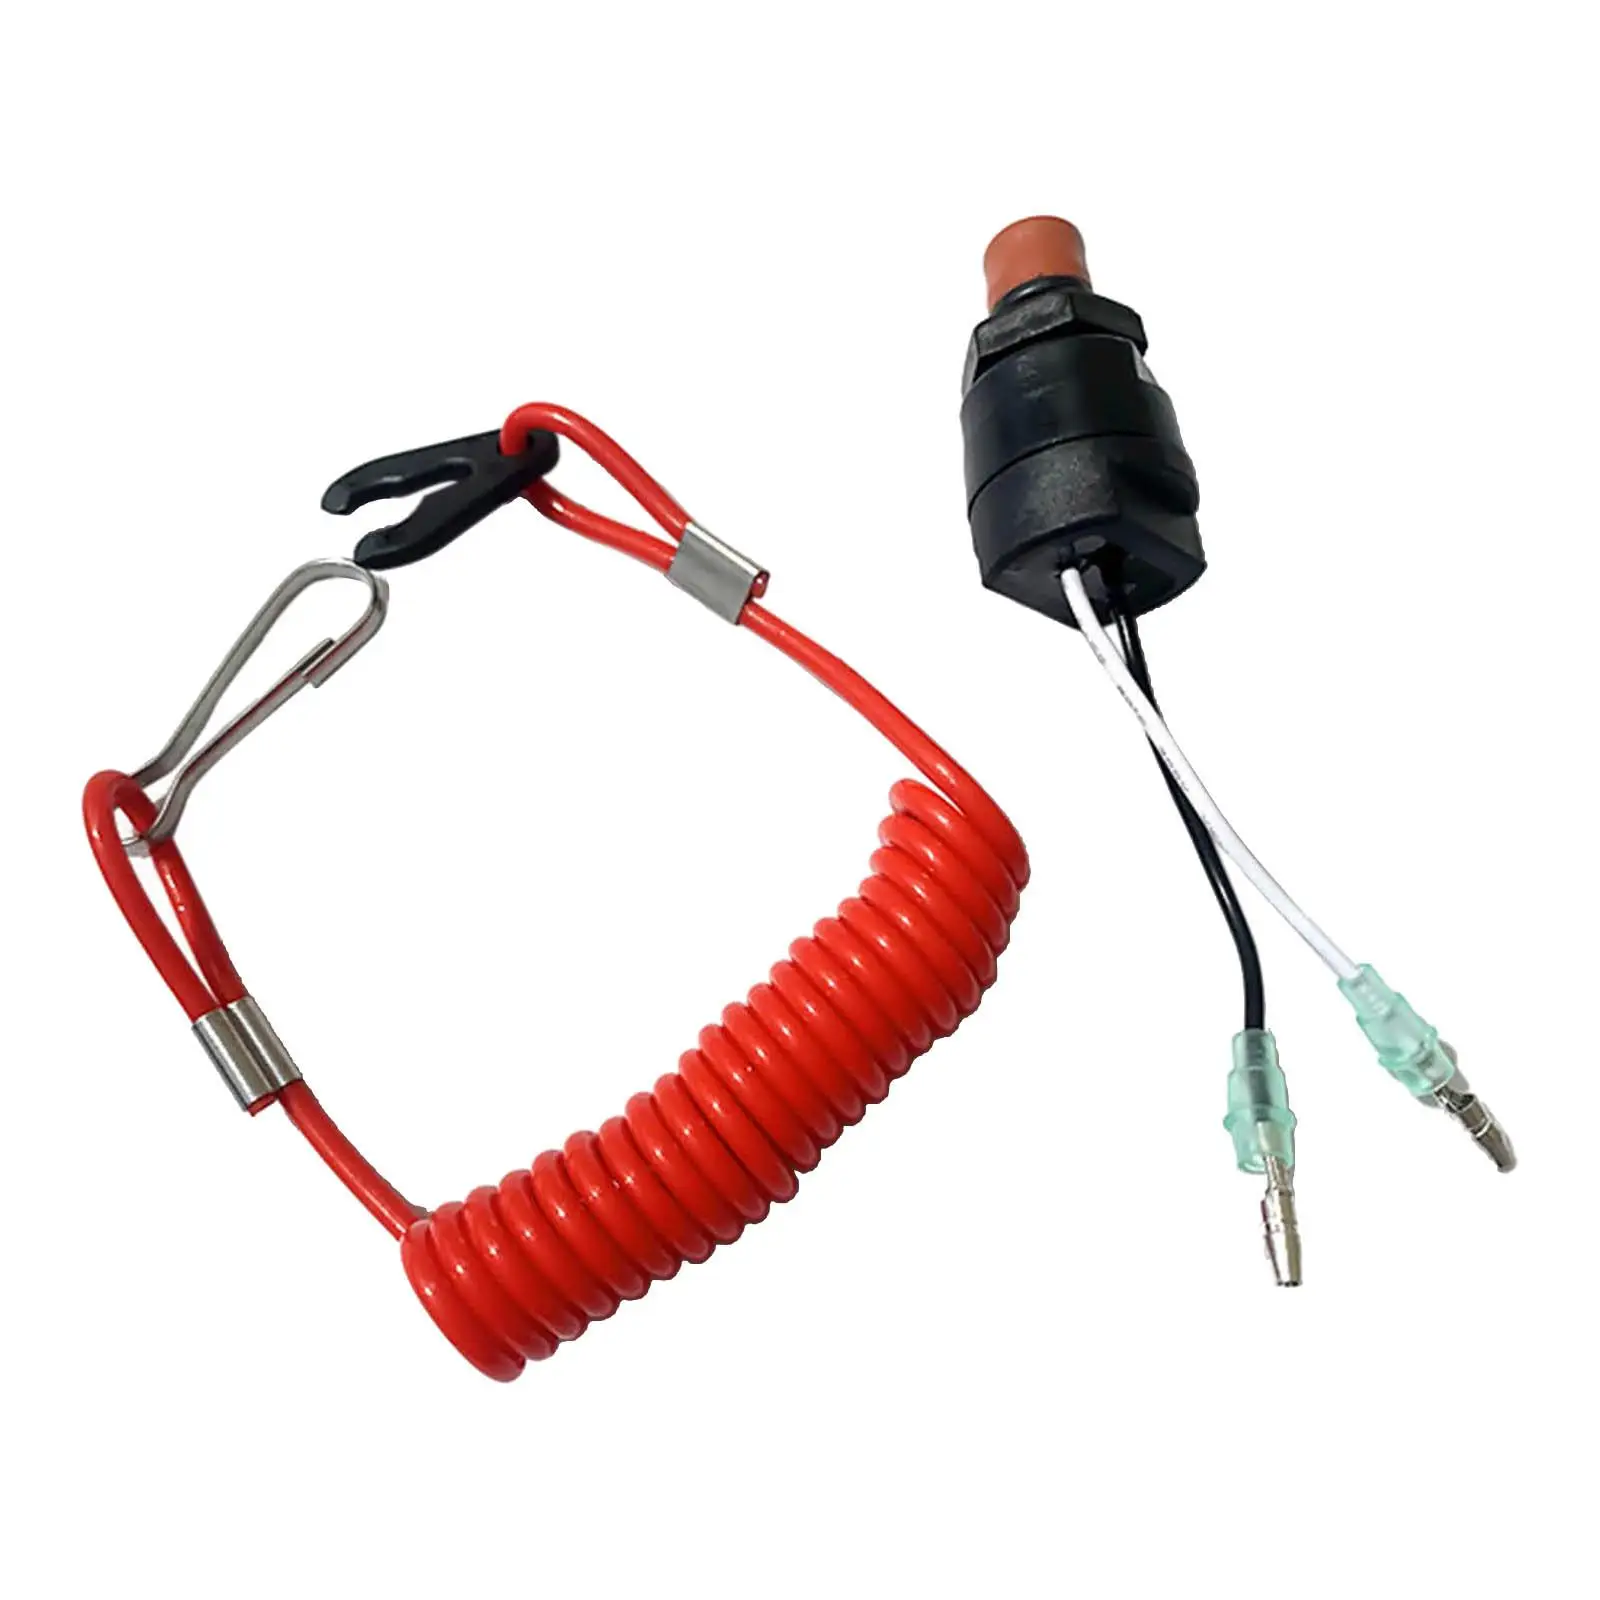 Boat Outboard Engine Motor Emergency Kill Stop Switch Motor Stop Switch for Honda Outboard Motors Bike Connector Cord Red